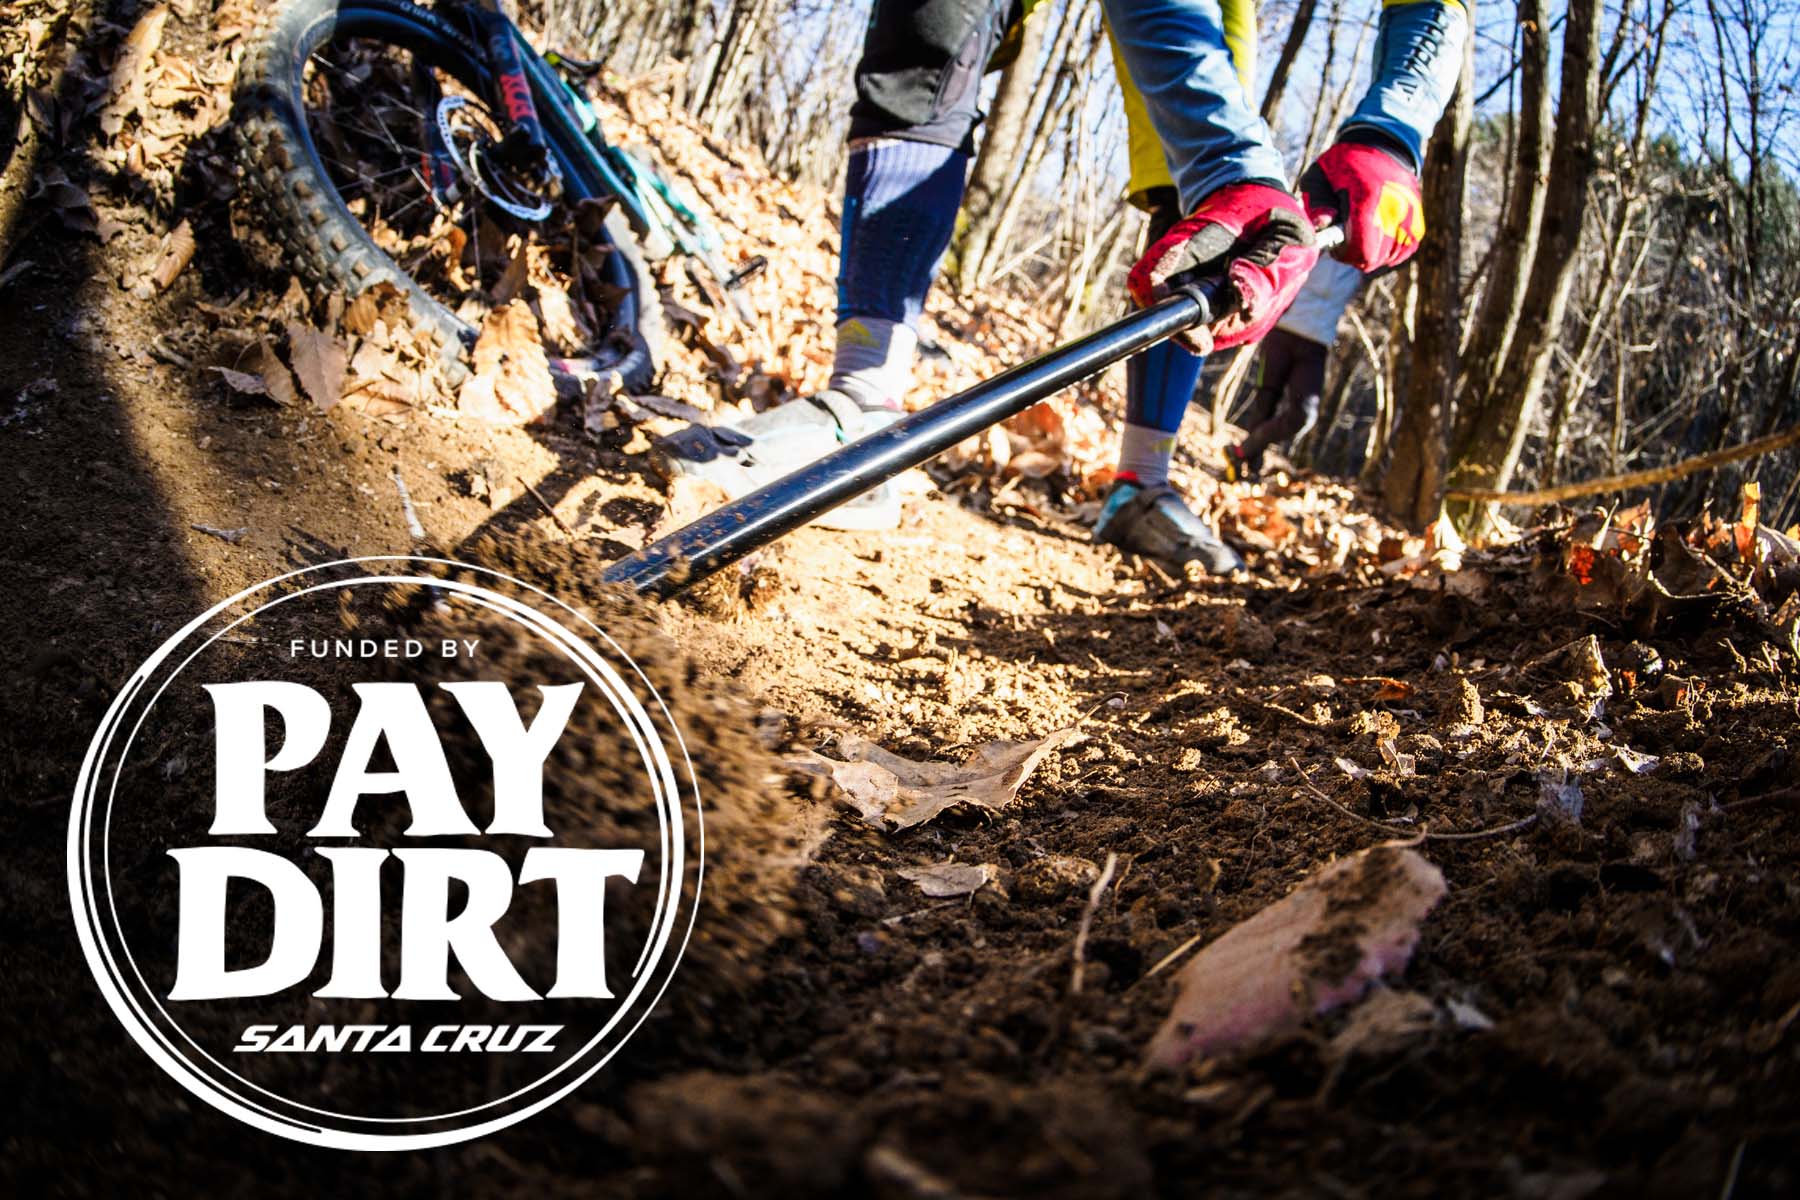 Ridgeline, proudly supported by the Santa Cruz PayDirt Fund